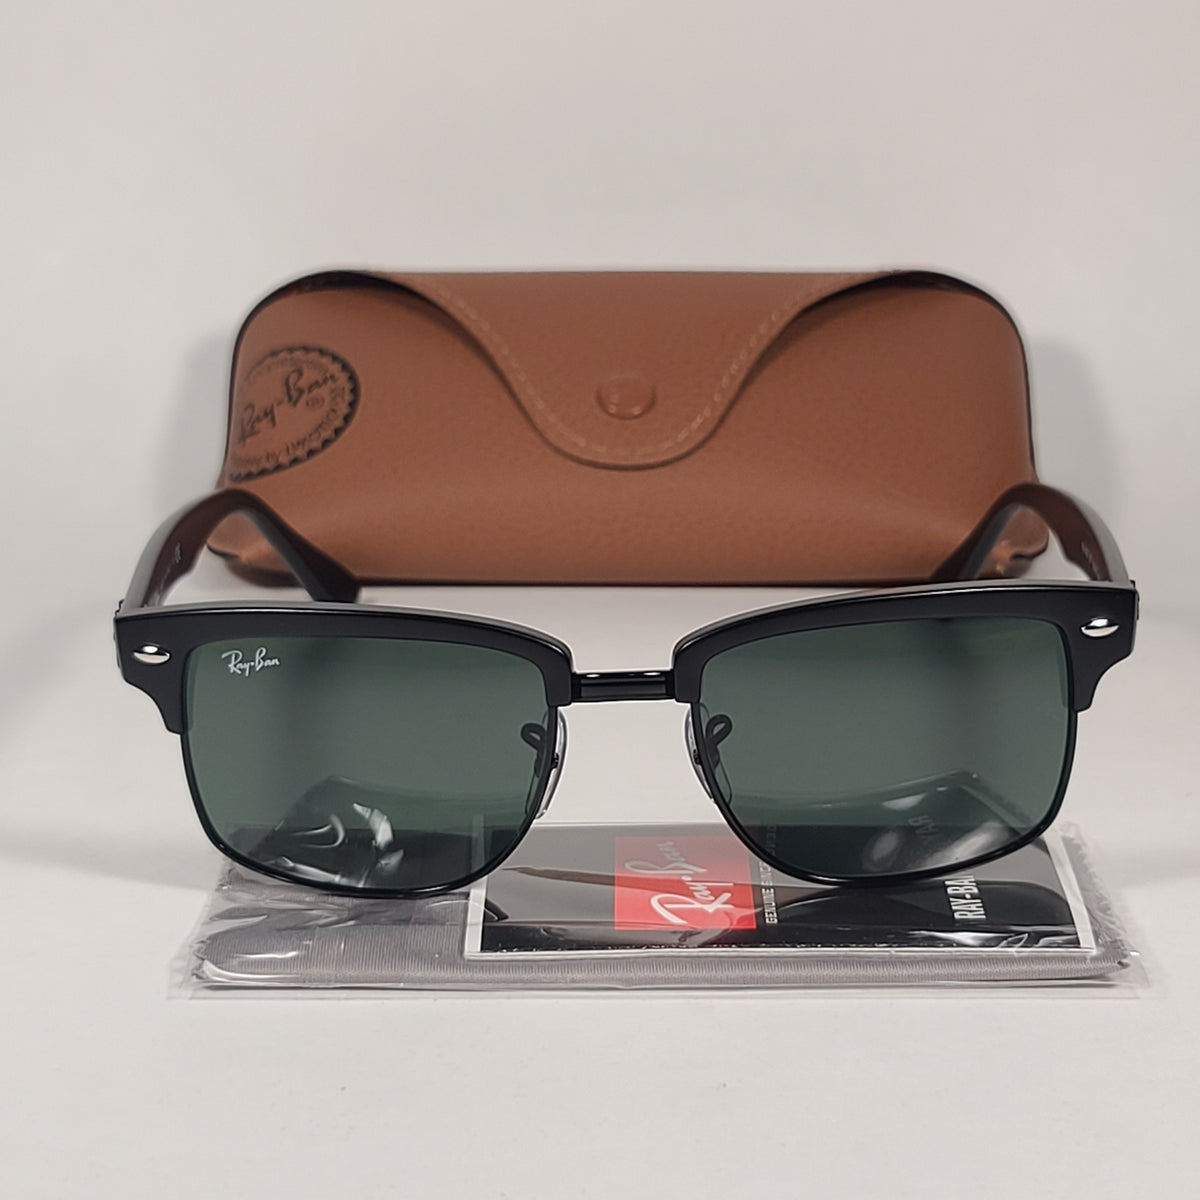 Ray-Ban Clubmaster Square Sunglasses Matte Black Gray Green Lens RB419